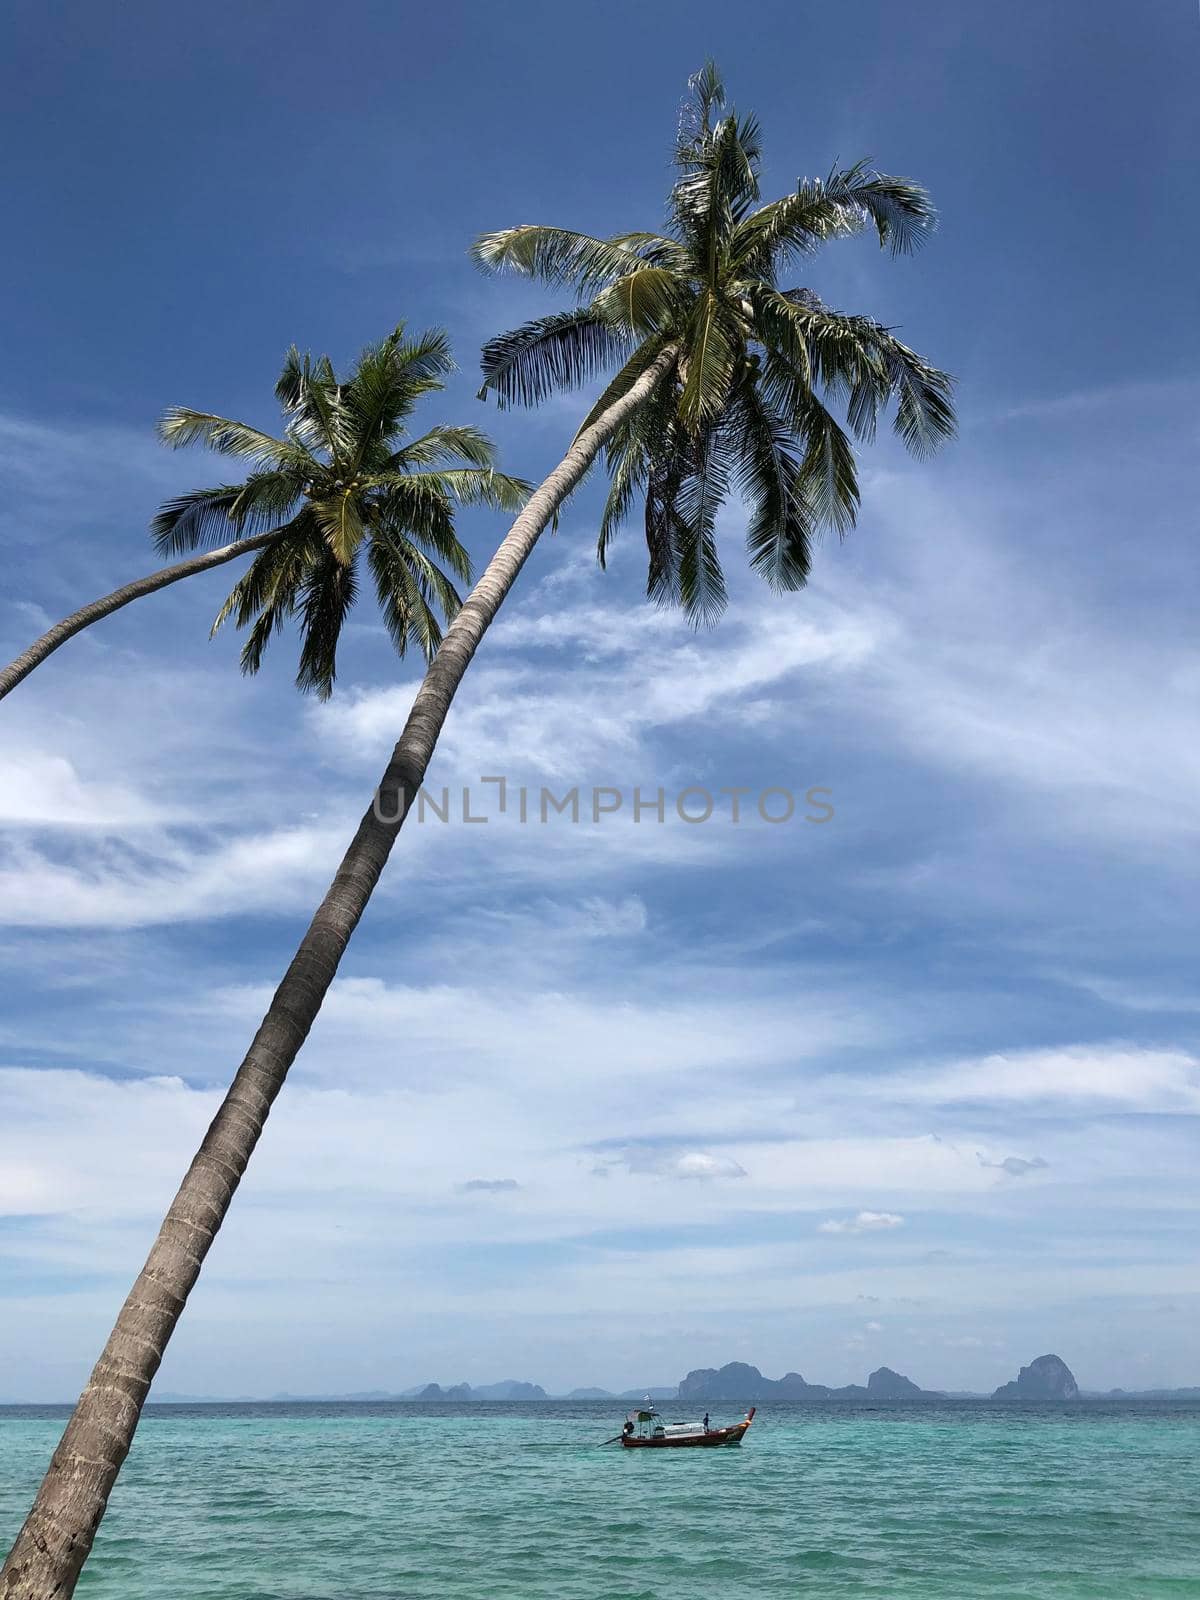 Palm trees on Koh Ngai in Thailand